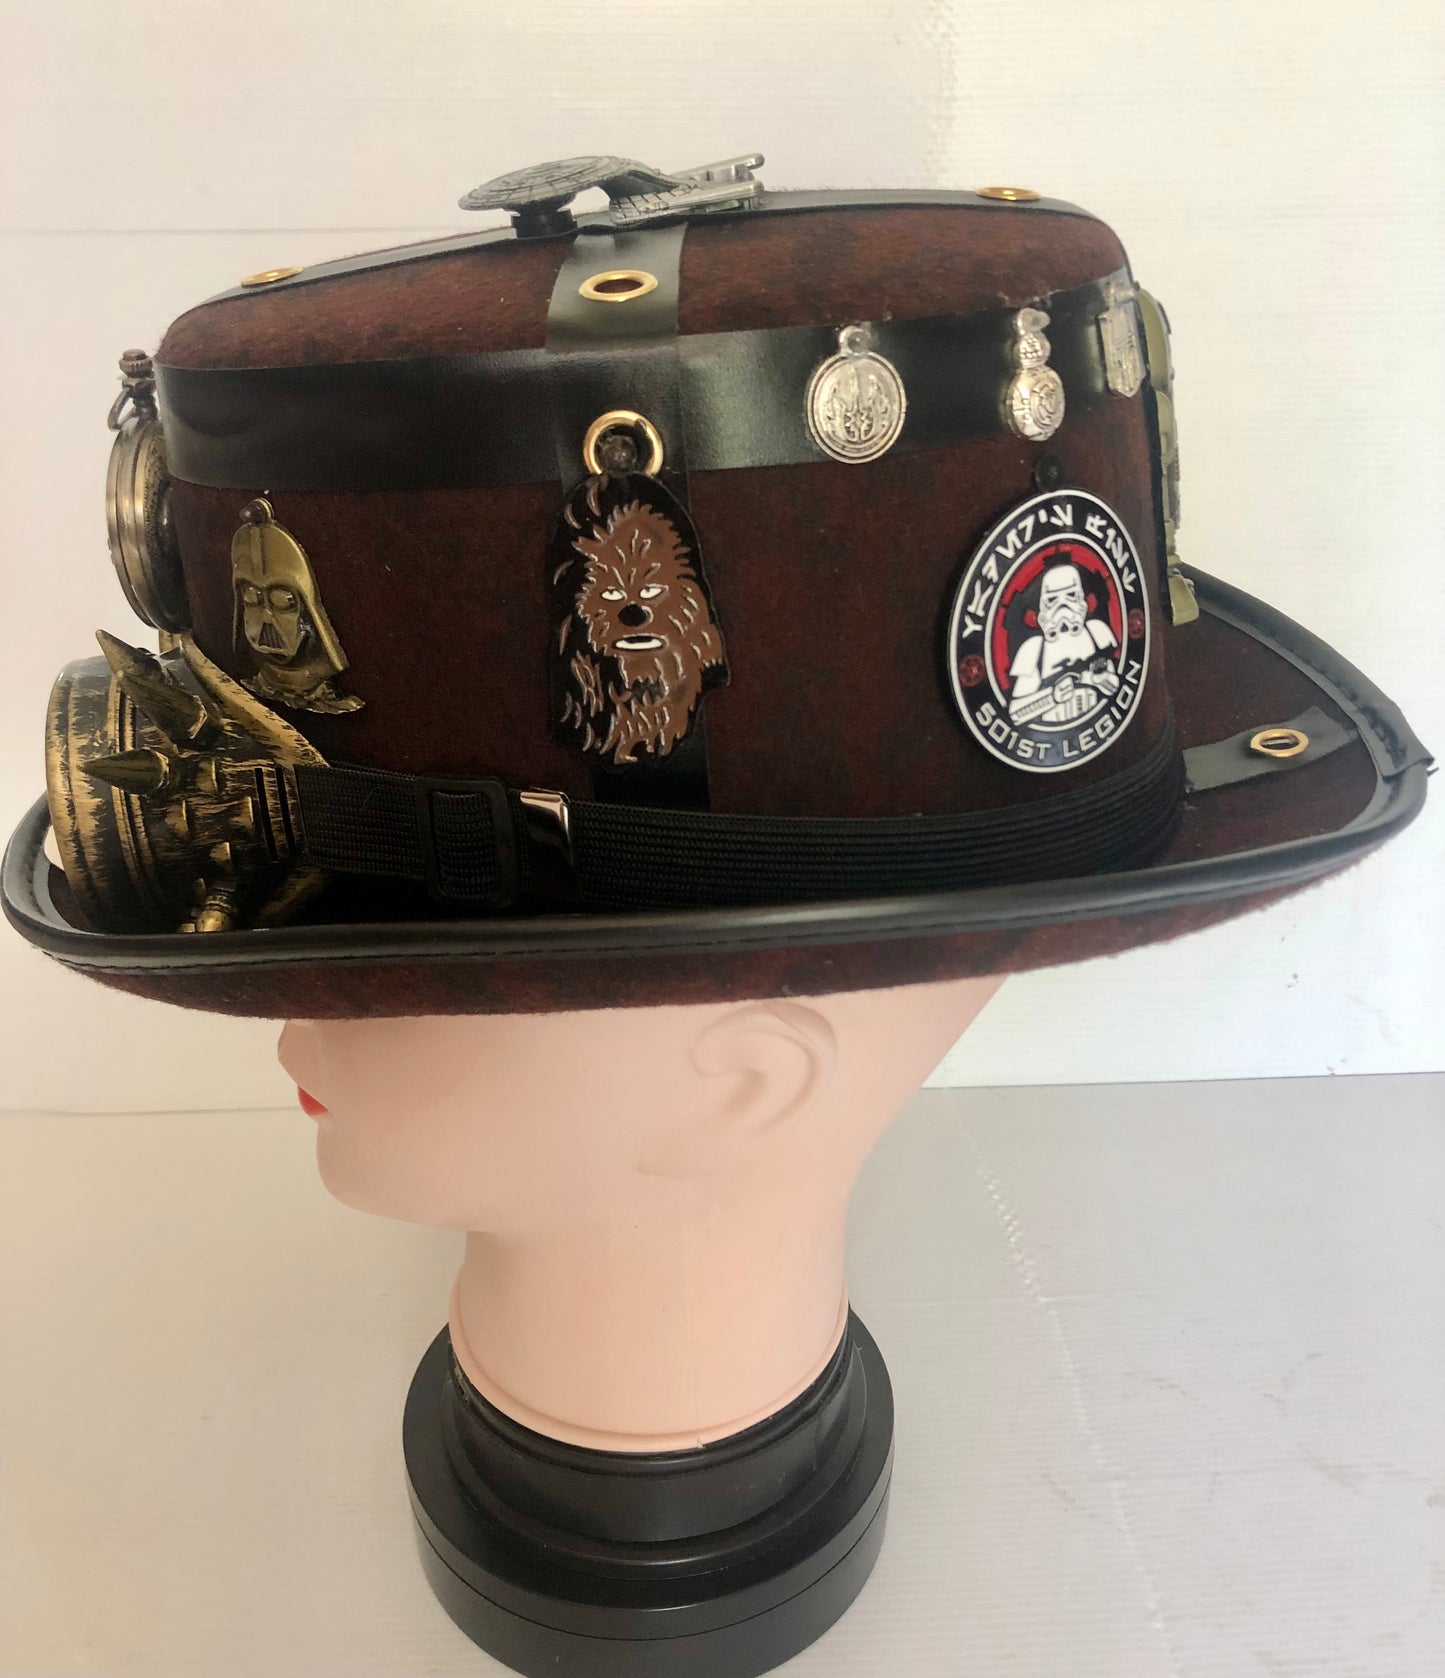 Steampunk Style Hat (Star Wars Theme) with Goggles (Item # 413)